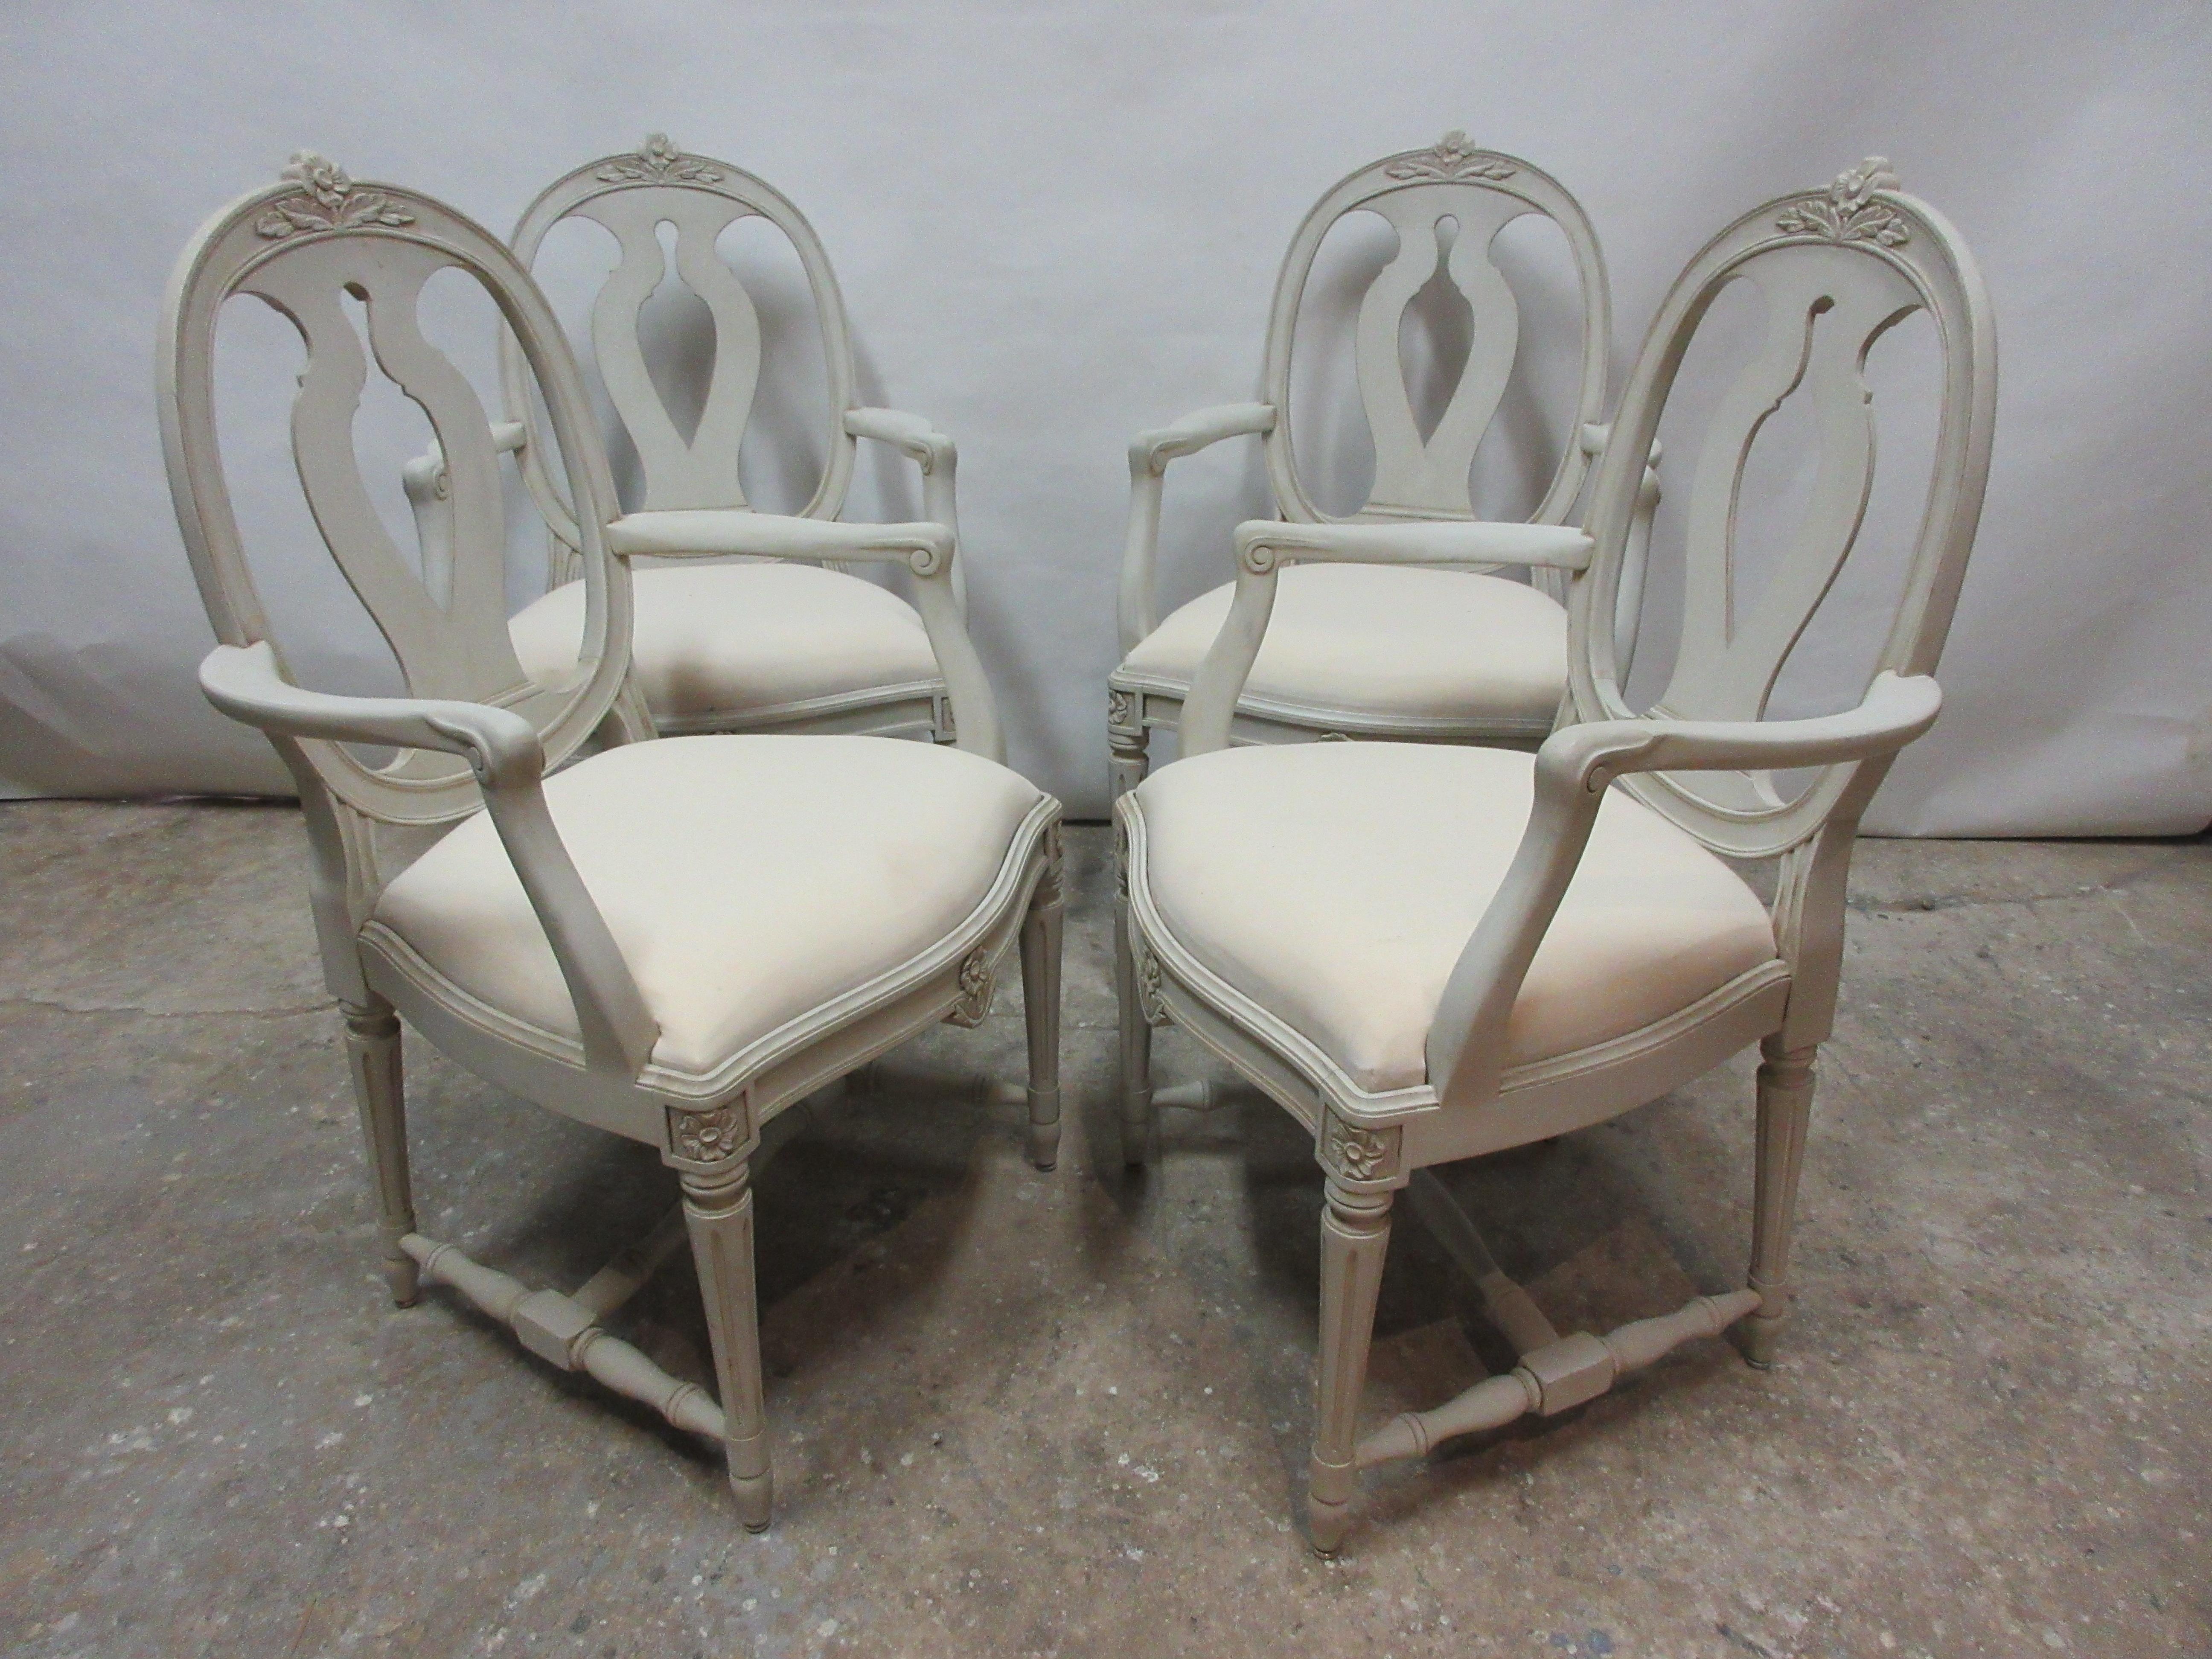 Set of 4 Swedish Gustavian Armchairs In Distressed Condition For Sale In Hollywood, FL